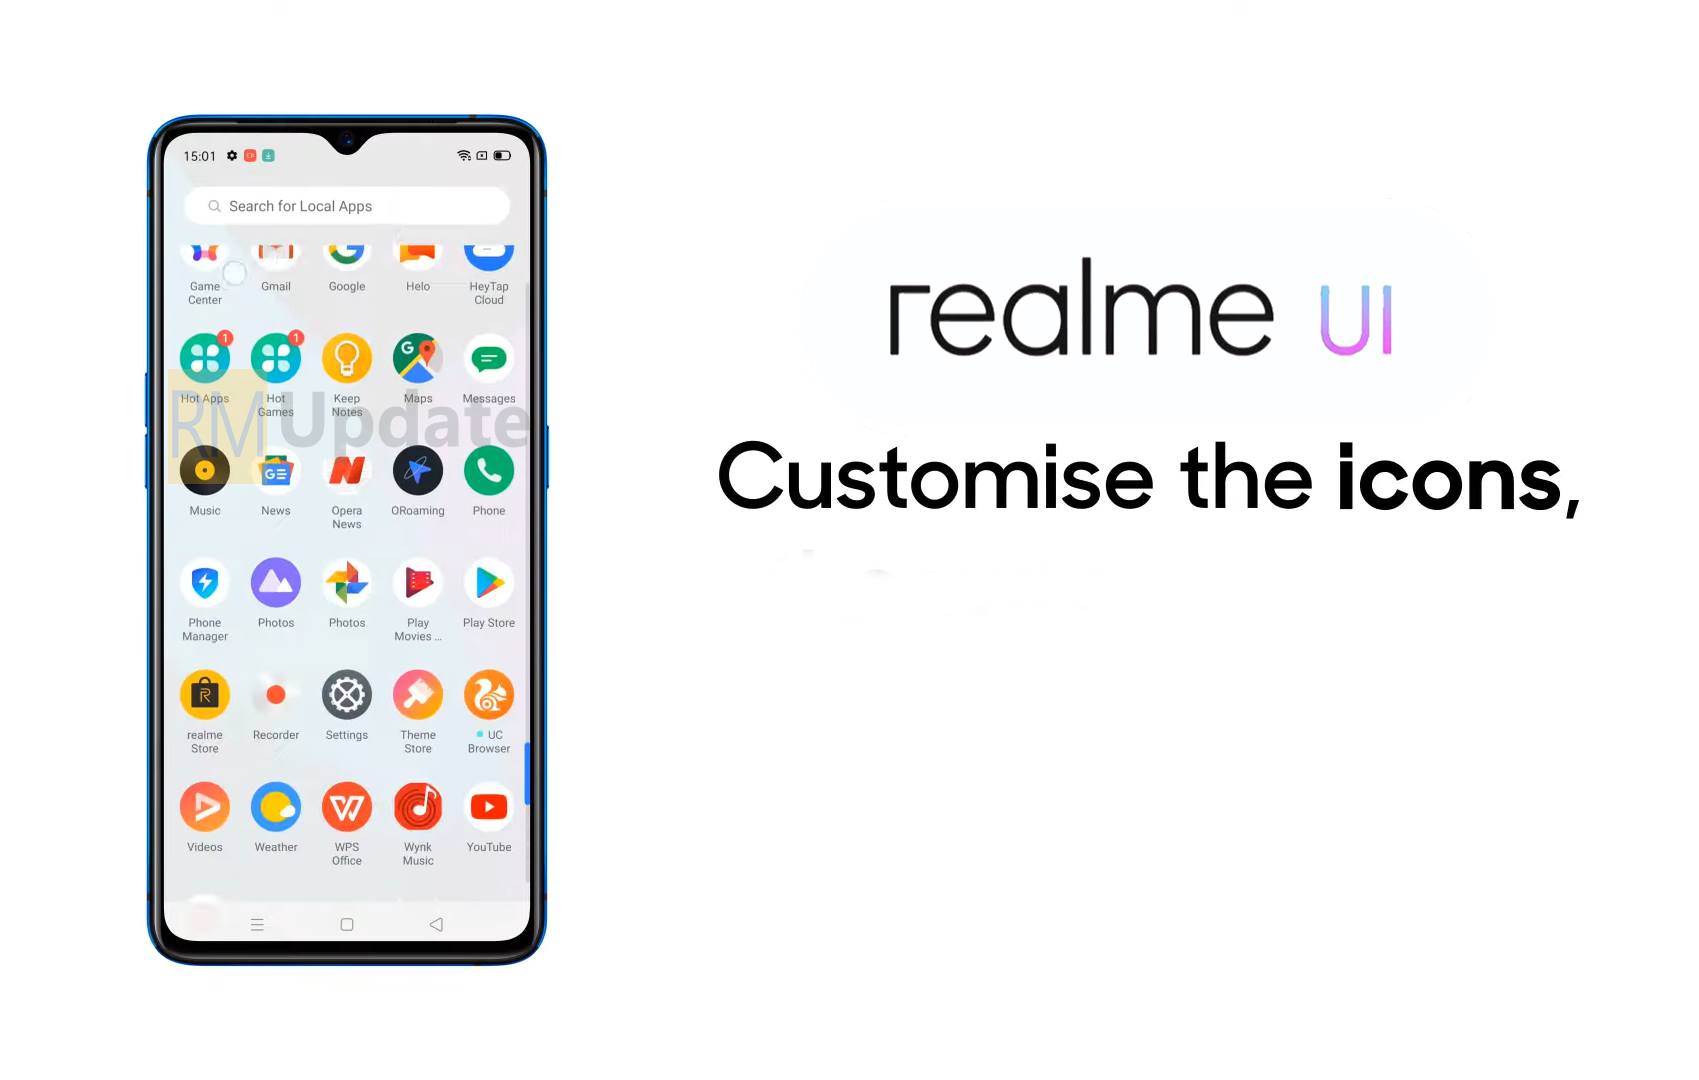 realme 5s gets the new realme ui 1.0 based on android 10 update; realme 5 stable update registration starts